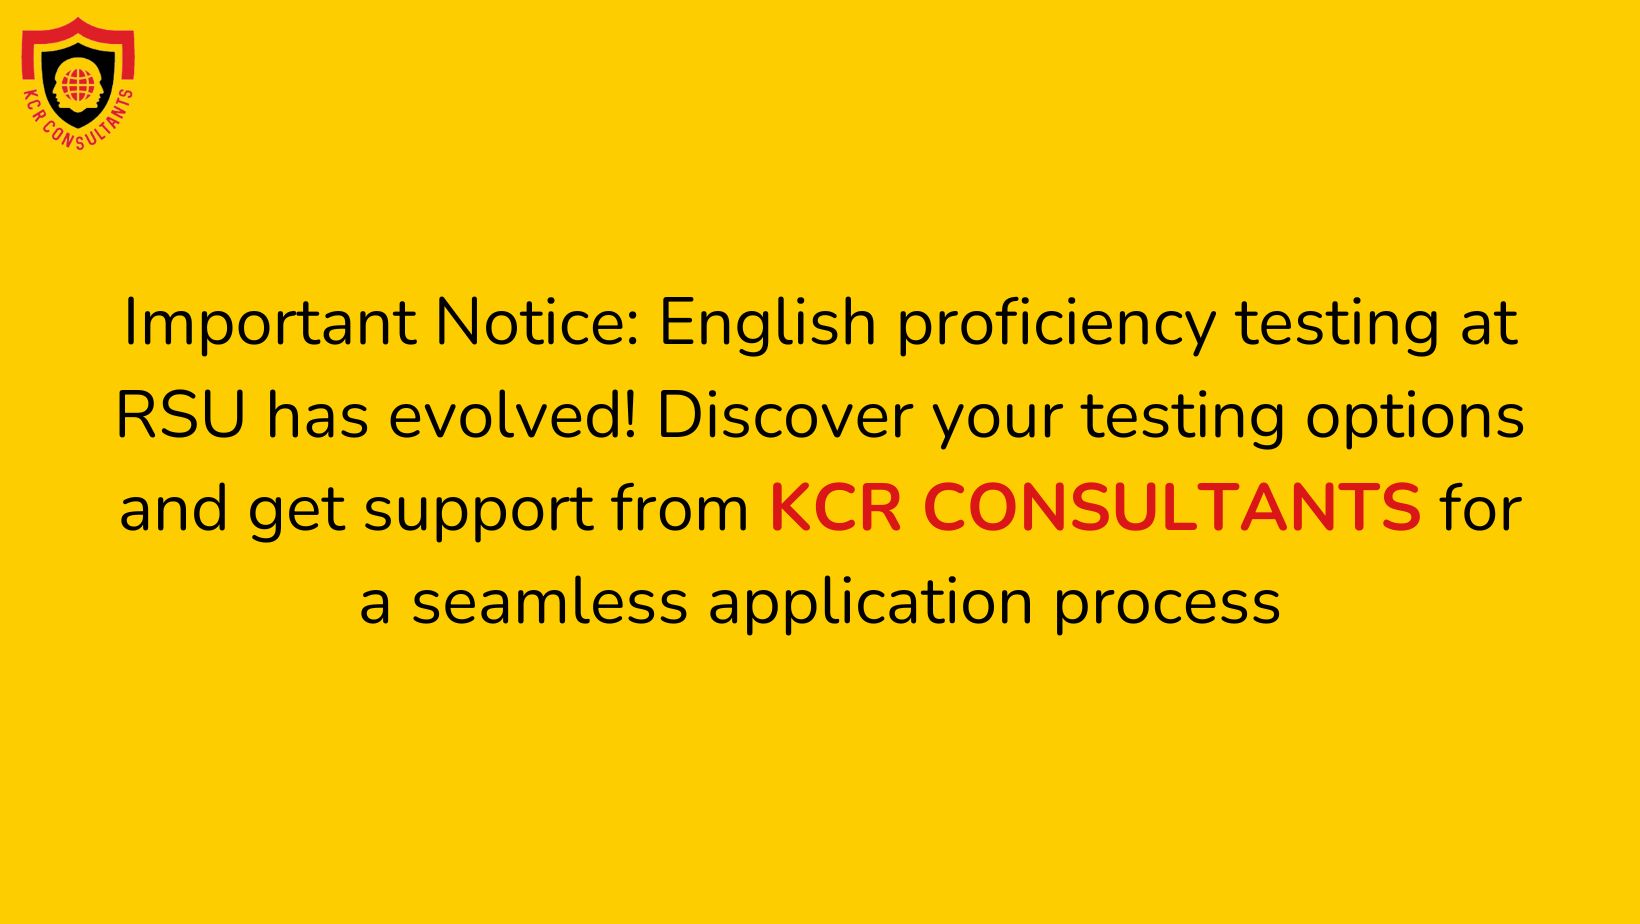 Riga Stradins University - English proficiency test requirements - Contact US - KCR CONSULTANTS